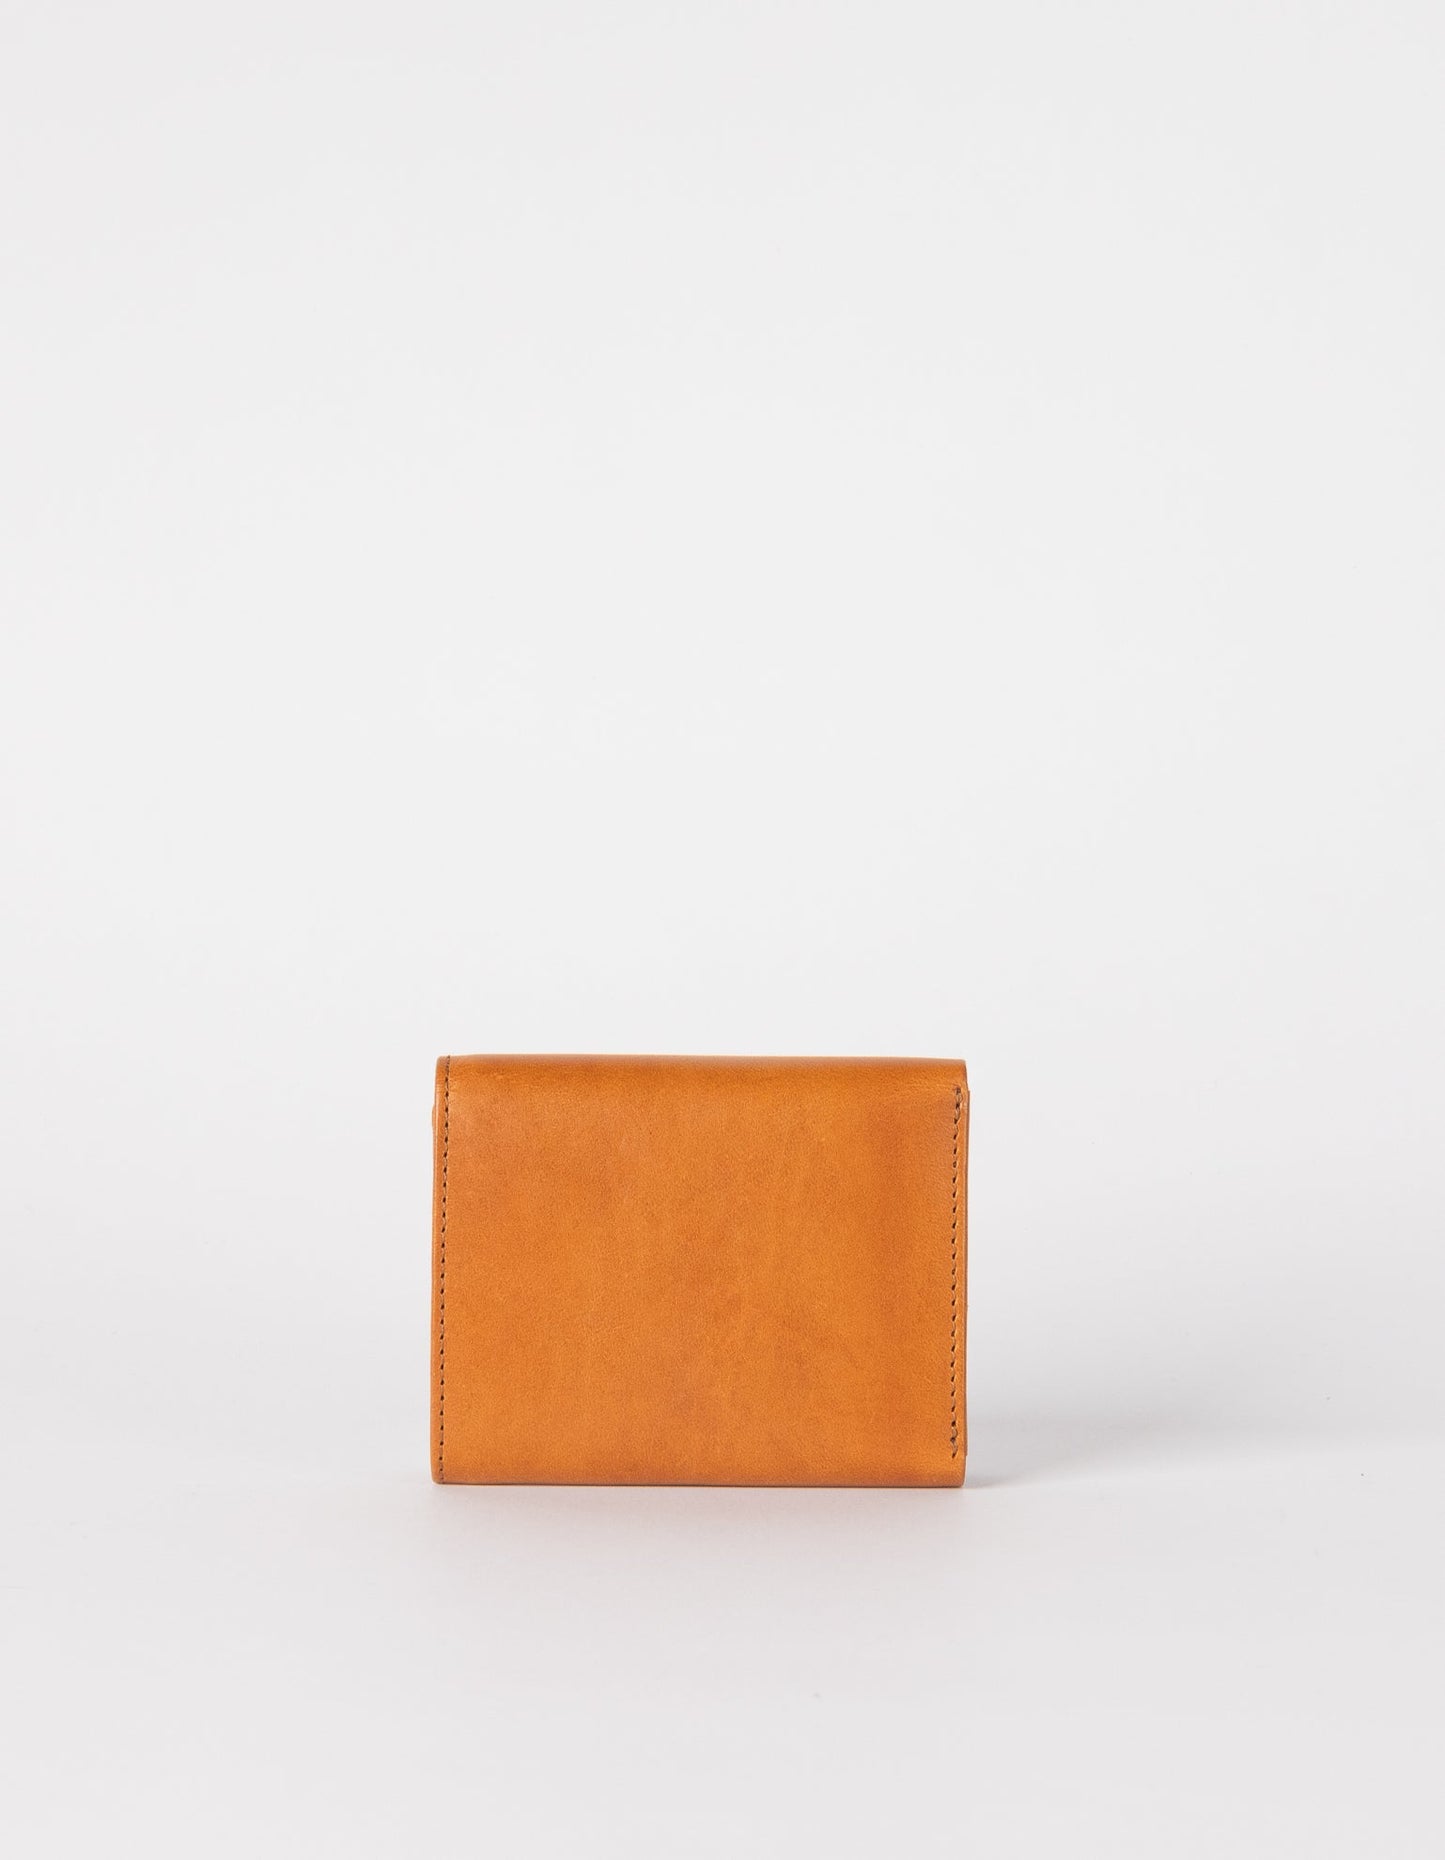 omybag - Ollie Wallet Cognac Classic Leather